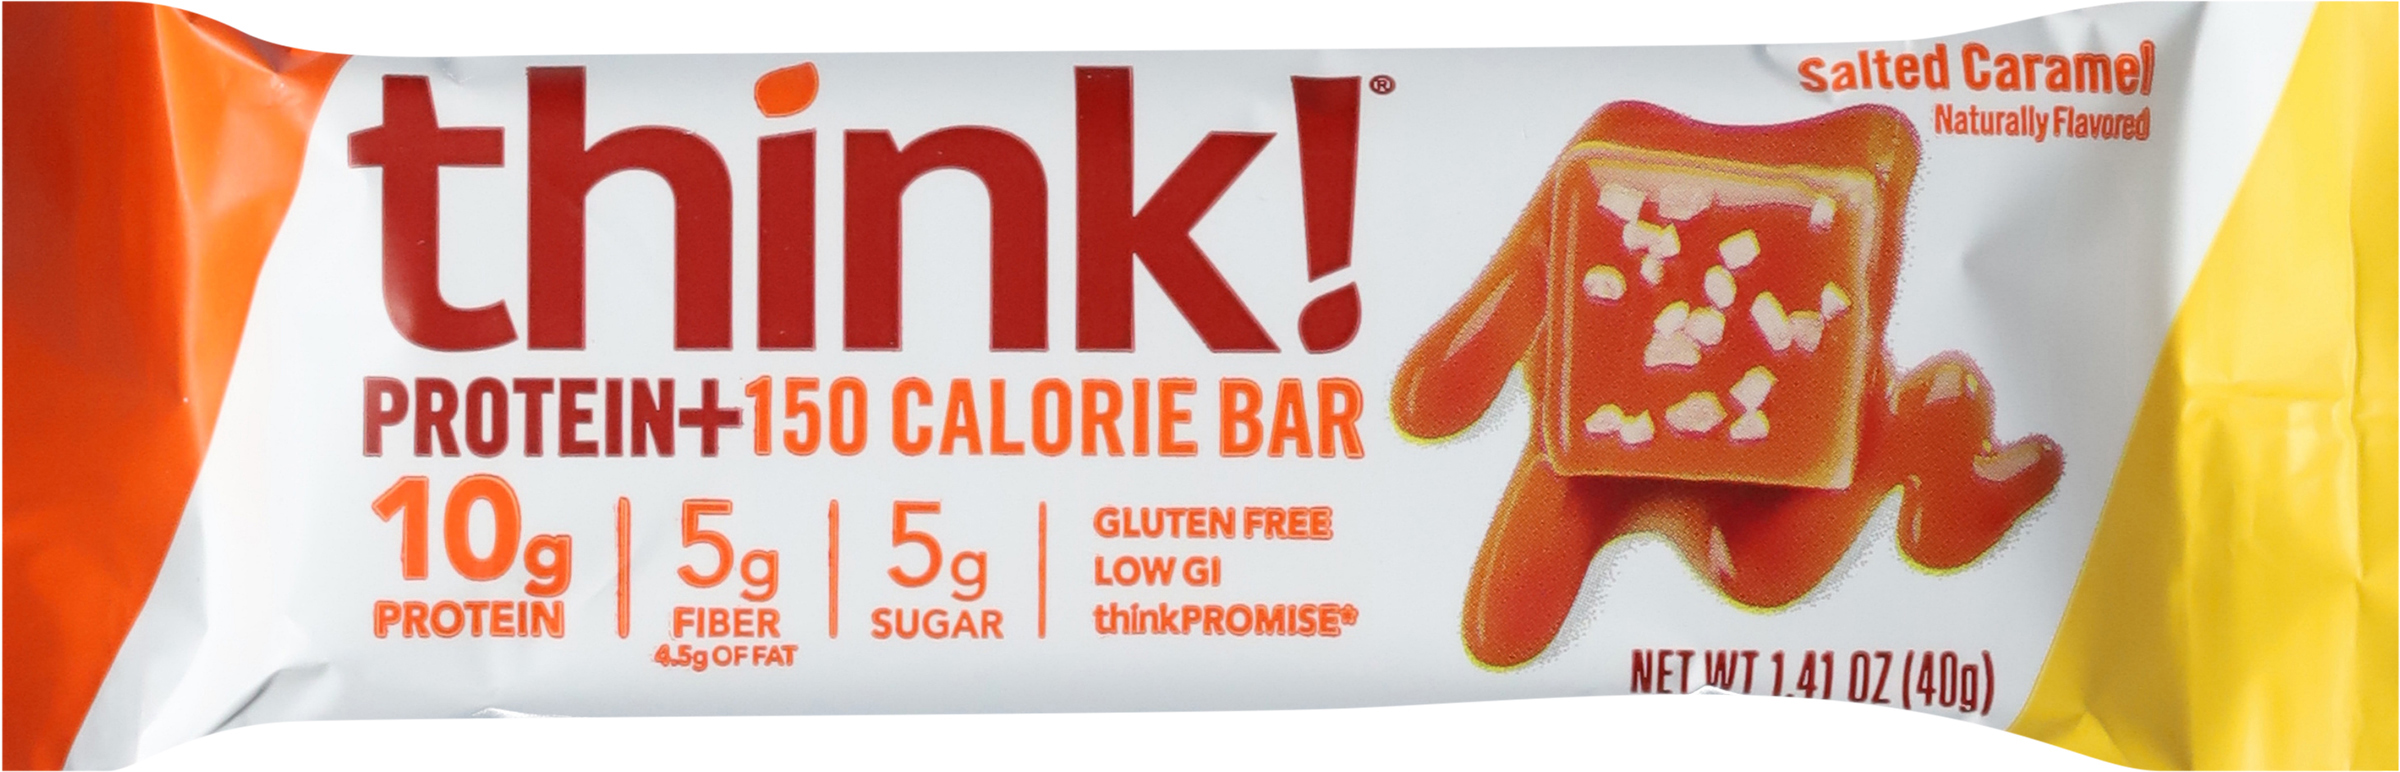 150 Calorie Bar, Salted Caramel, Protein+ image